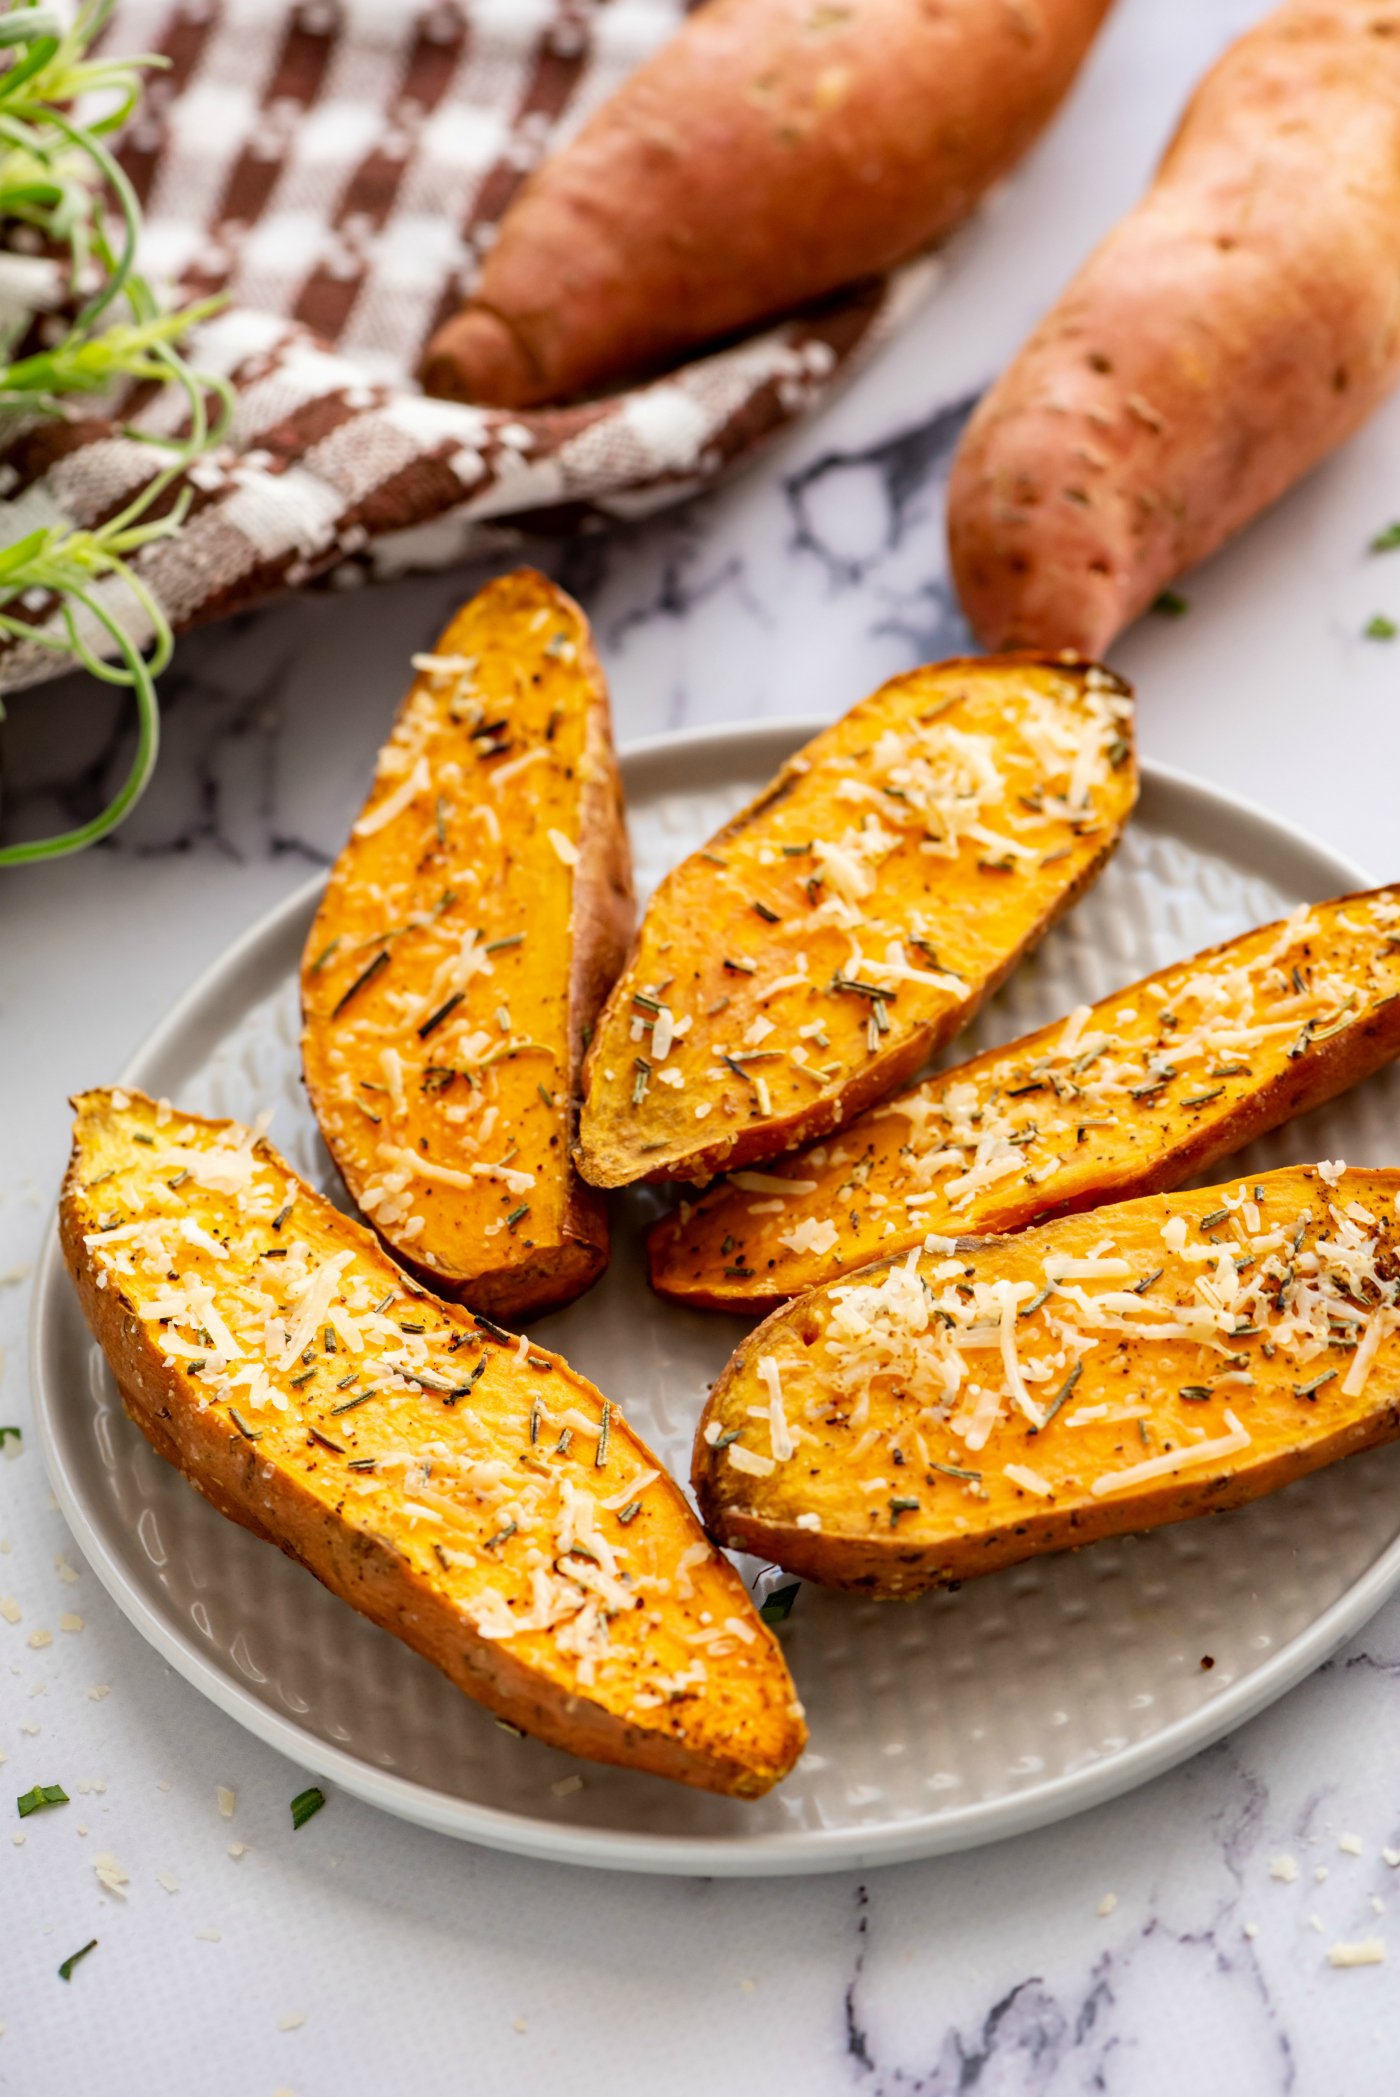 https://reluctantentertainer.com/wp-content/uploads/2017/10/Roasted-Sweet-Potatoes-with-Rosemary-3.jpg